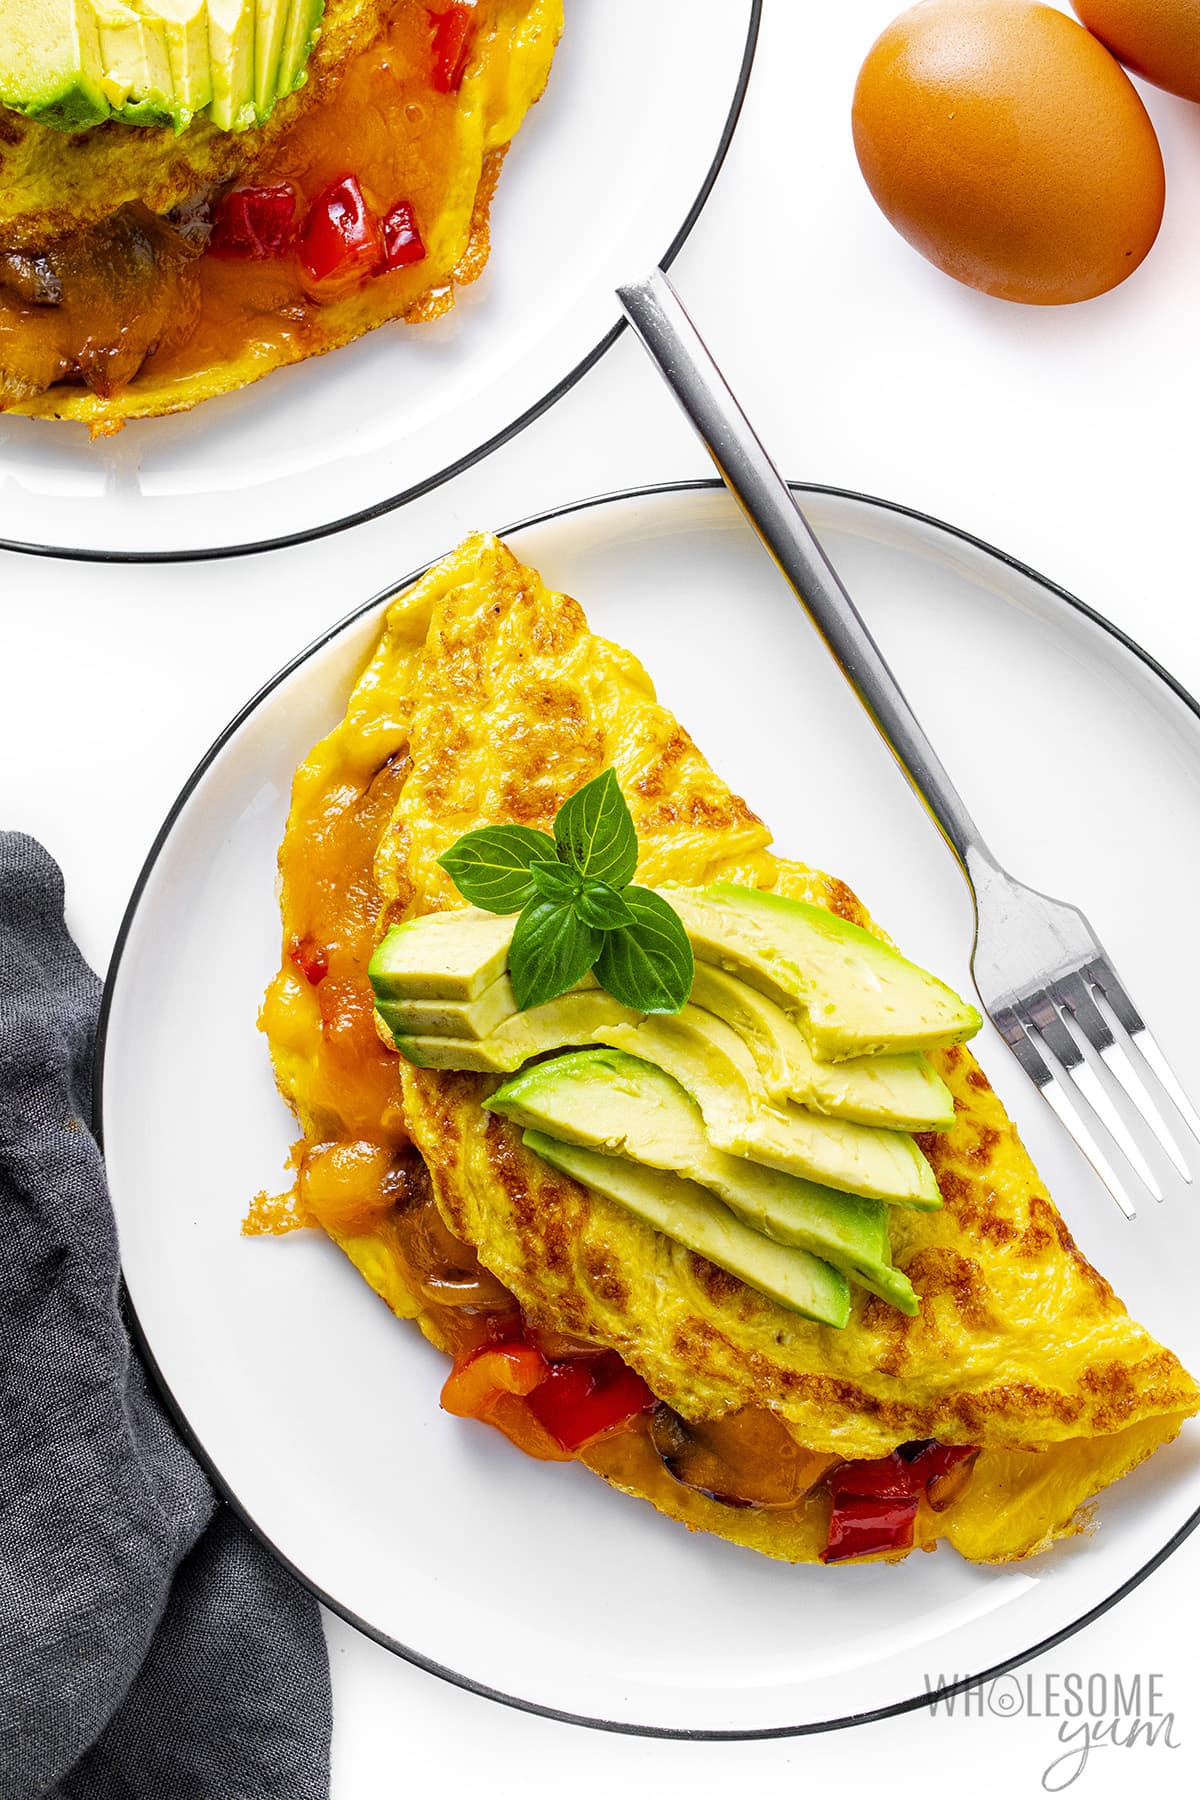 Best Omelette Recipes For A Nutritious And Delicious Breakfast